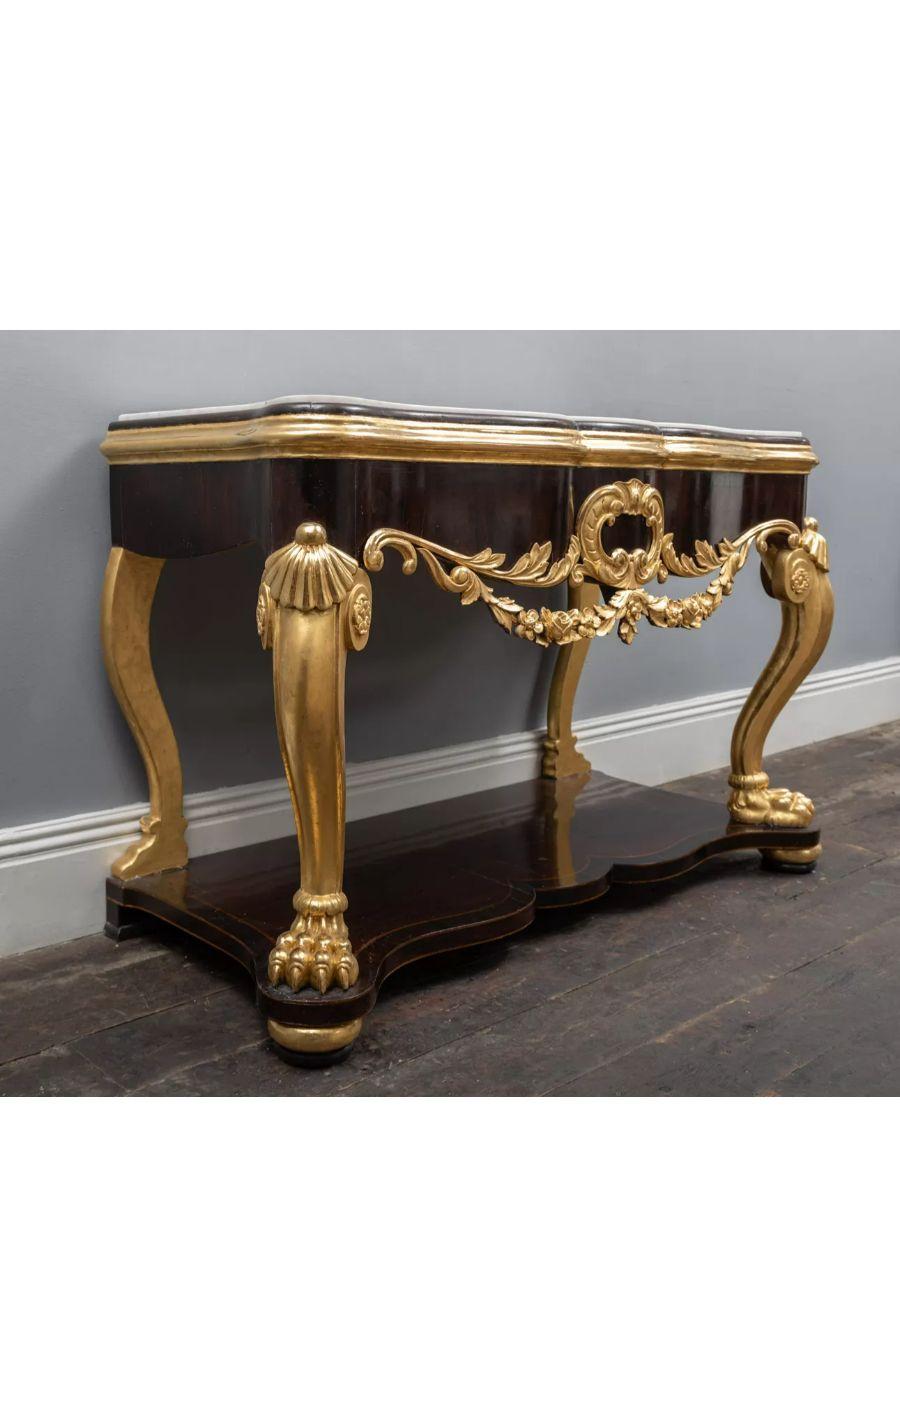 French Régence Style dark wood and gilt Console Table, circa 1860

An antique French Régence style wooden table with gold gilded elements and a white Statuary Carrara marble top.

The serpentine shaped frieze is overlaid with carved and gilded